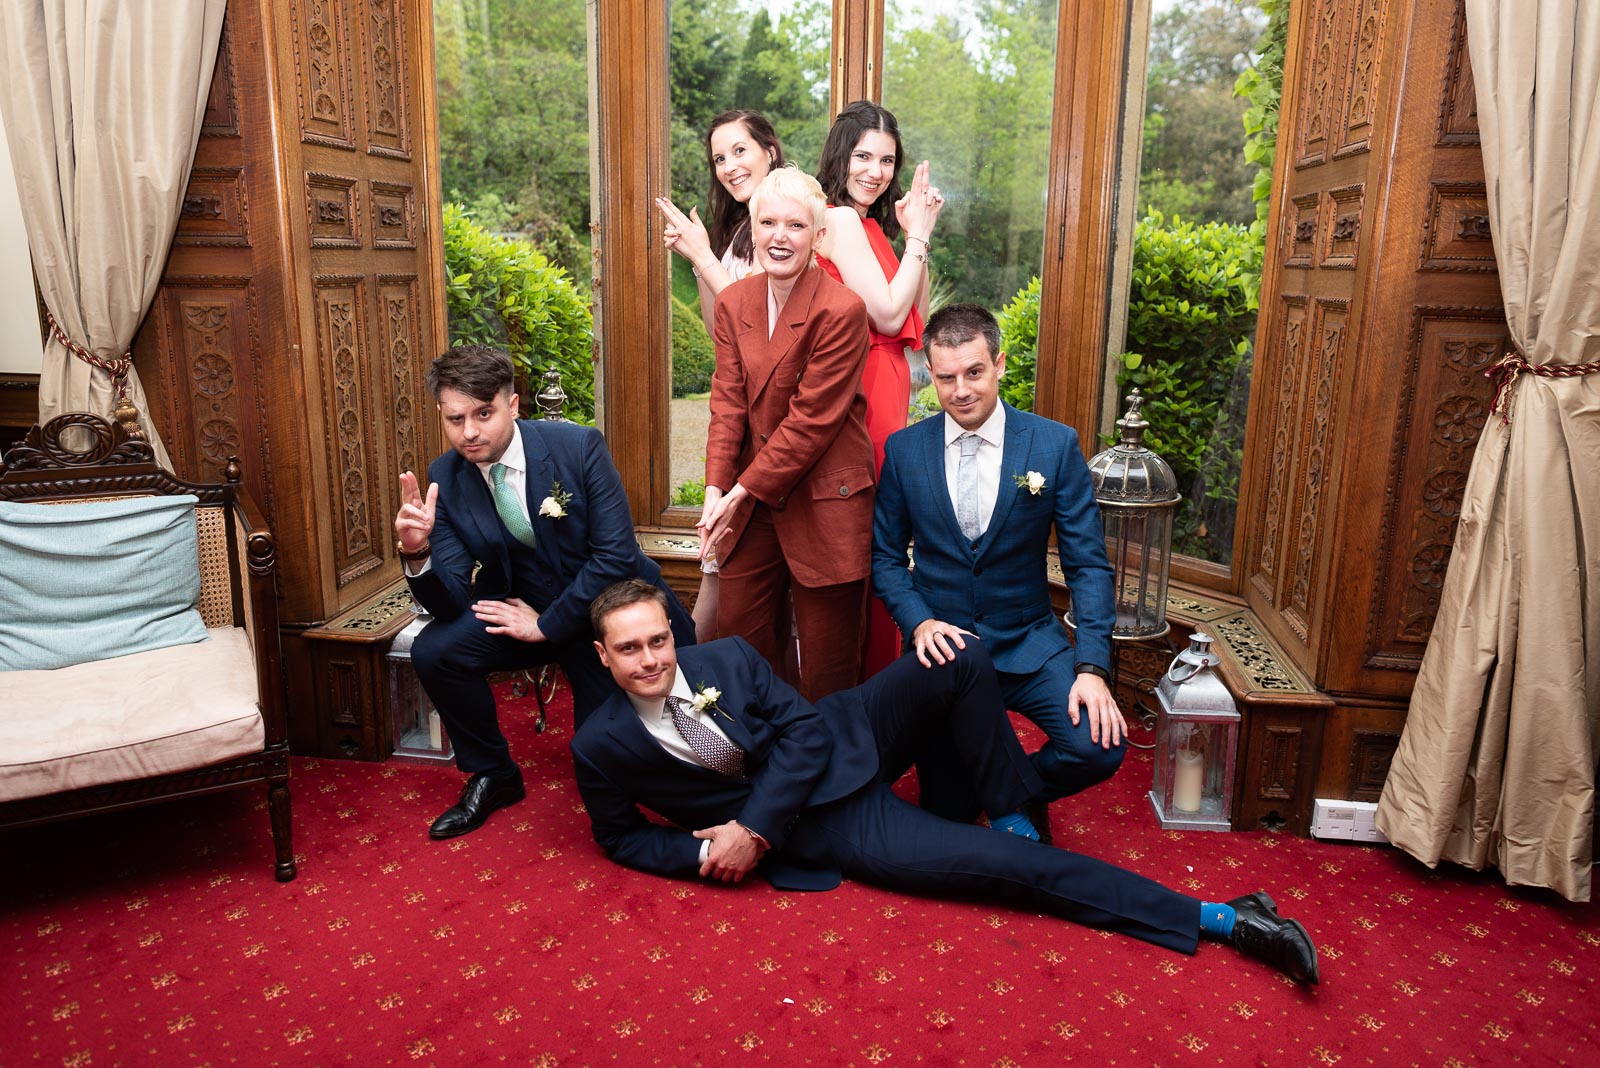 Jeff and Carmen'schildren pull a 007 pose in Manor by the Lake in Cheltenham after their wedding.